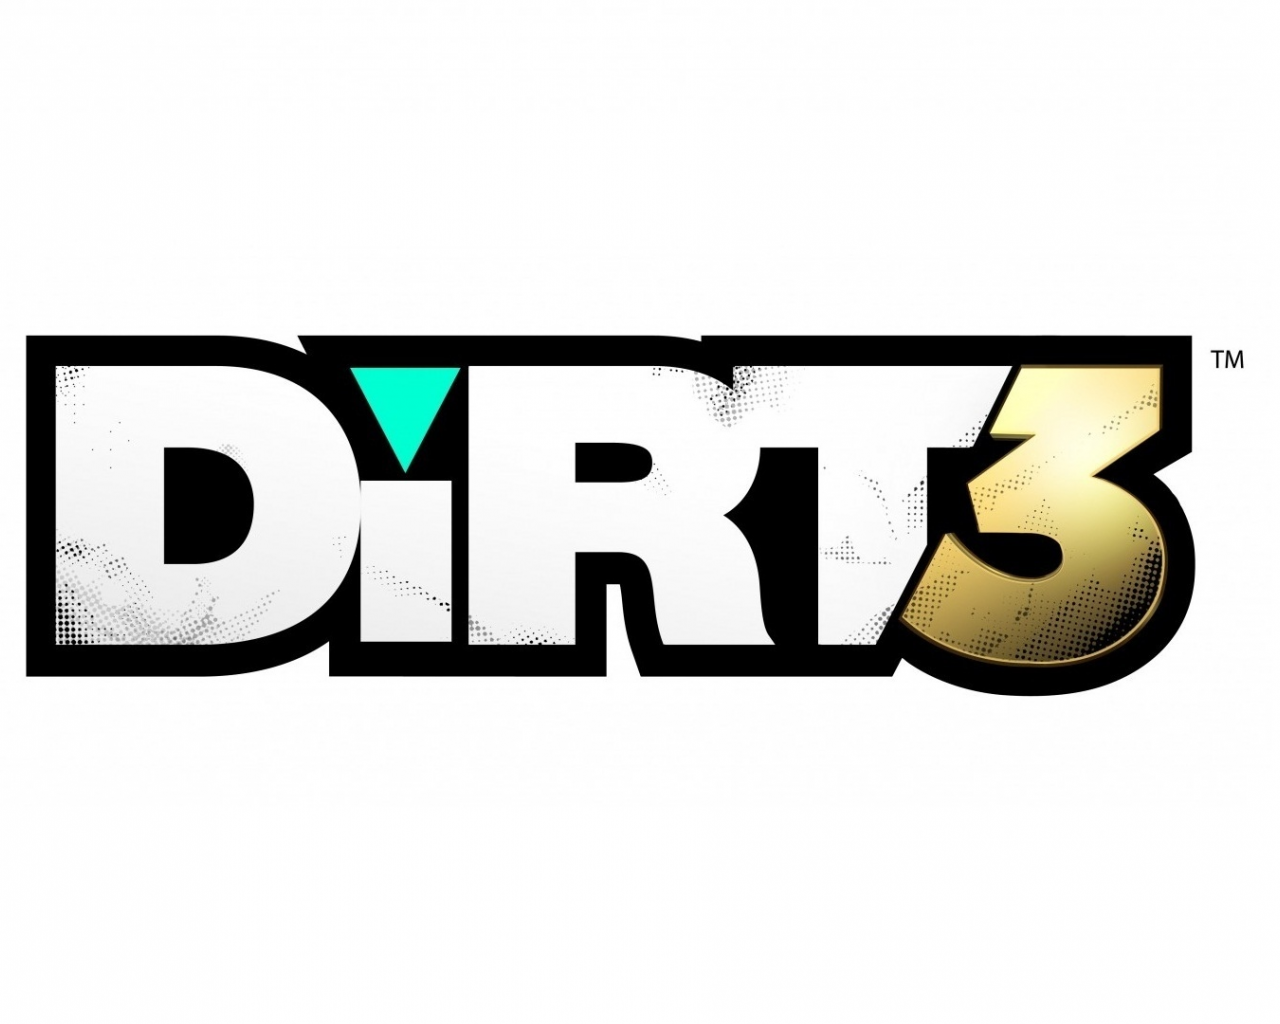 Dirt 3 not on steam фото 72